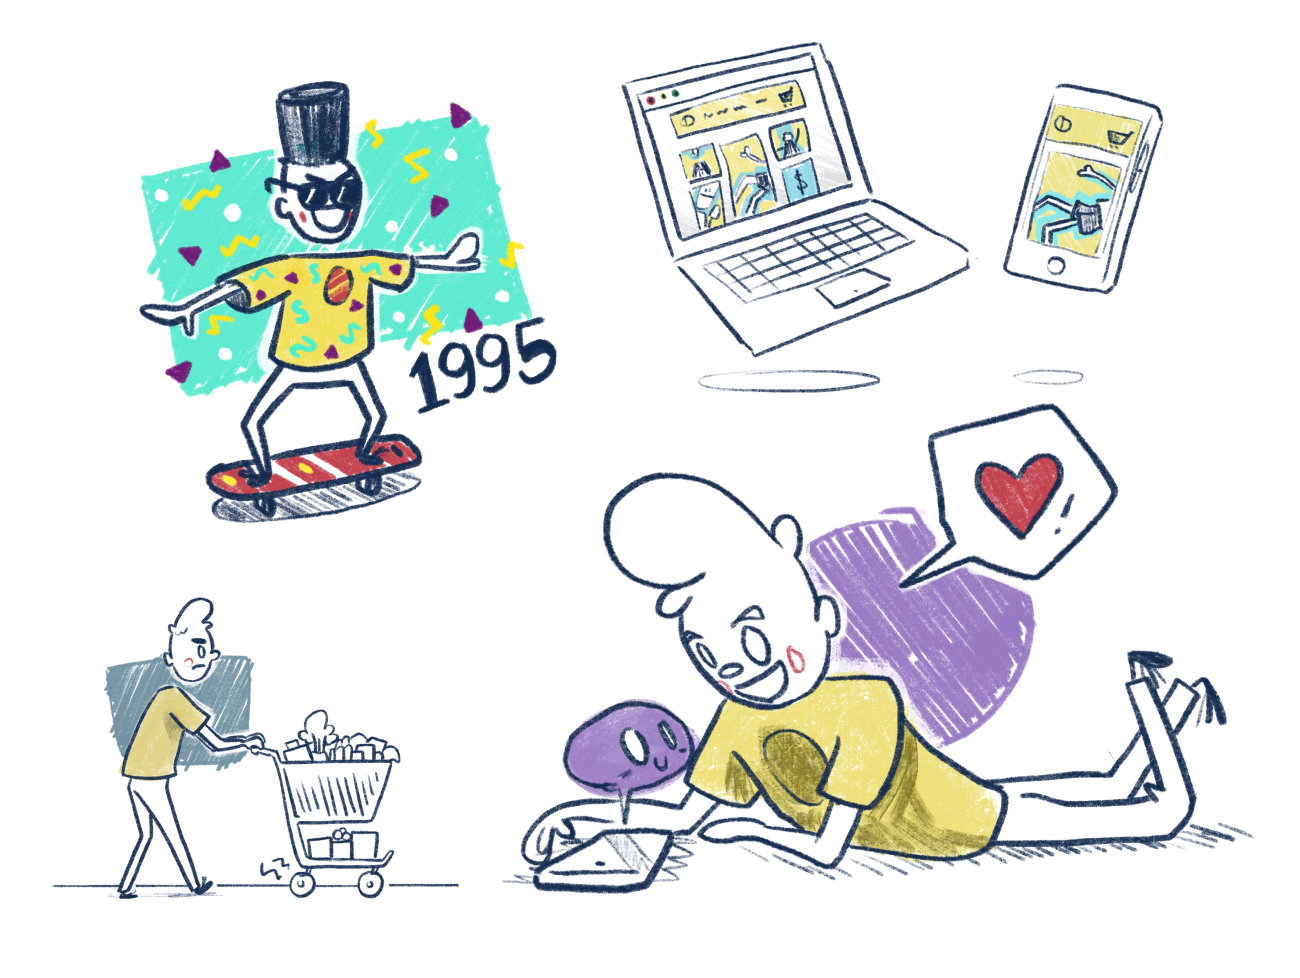 a collection of scenes: a skateboarder looking rad from 1995, a computer and phone on social media sites, a character in a yellow shirt pushing a shopping cart grumpily, and the character in the yellow shirt laying on the ground happily with his phone which smiles back